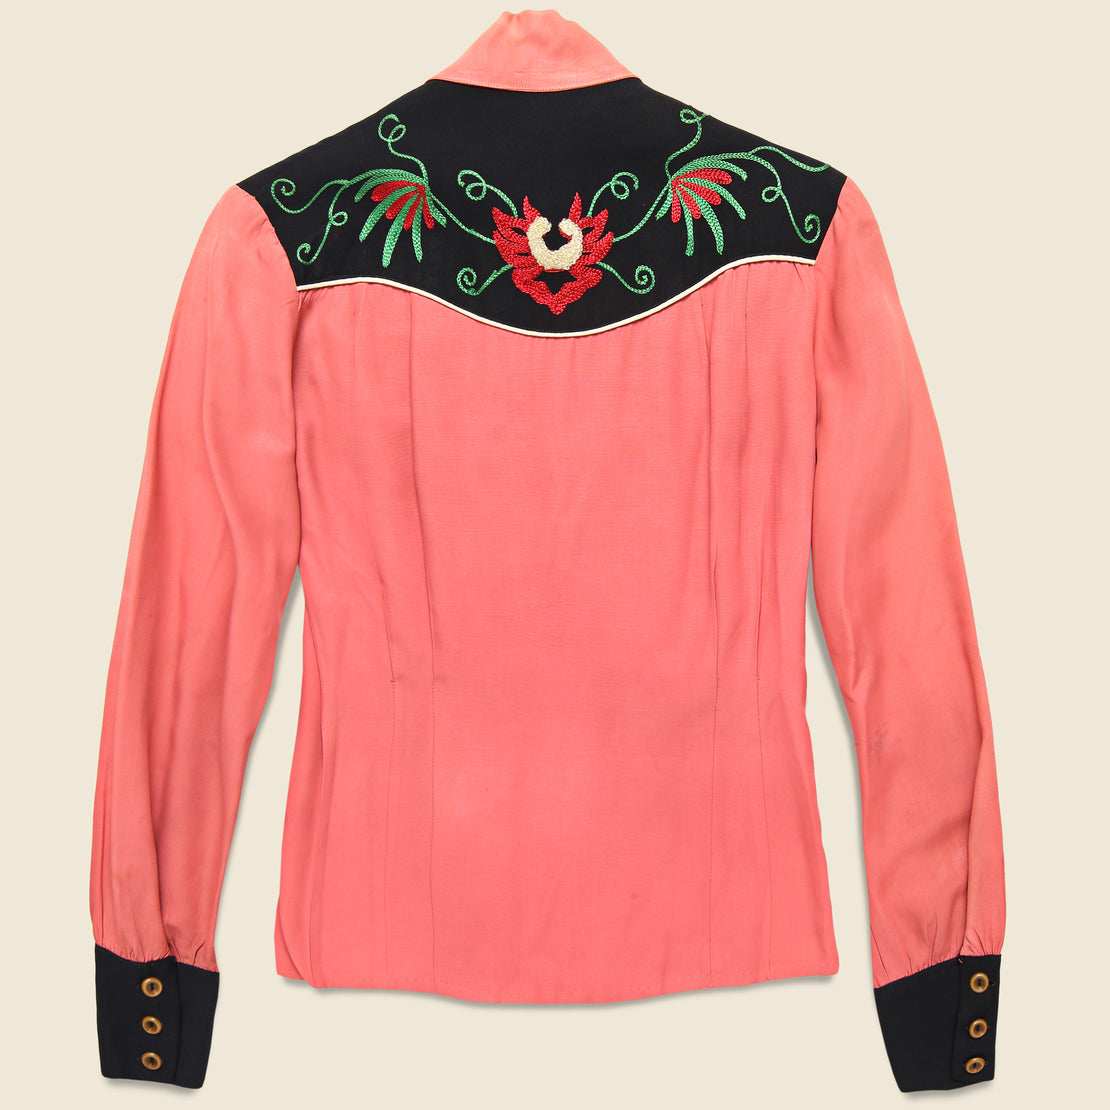 Penneys Ranchcraft Western Embroidered Blouse - Coral Pink